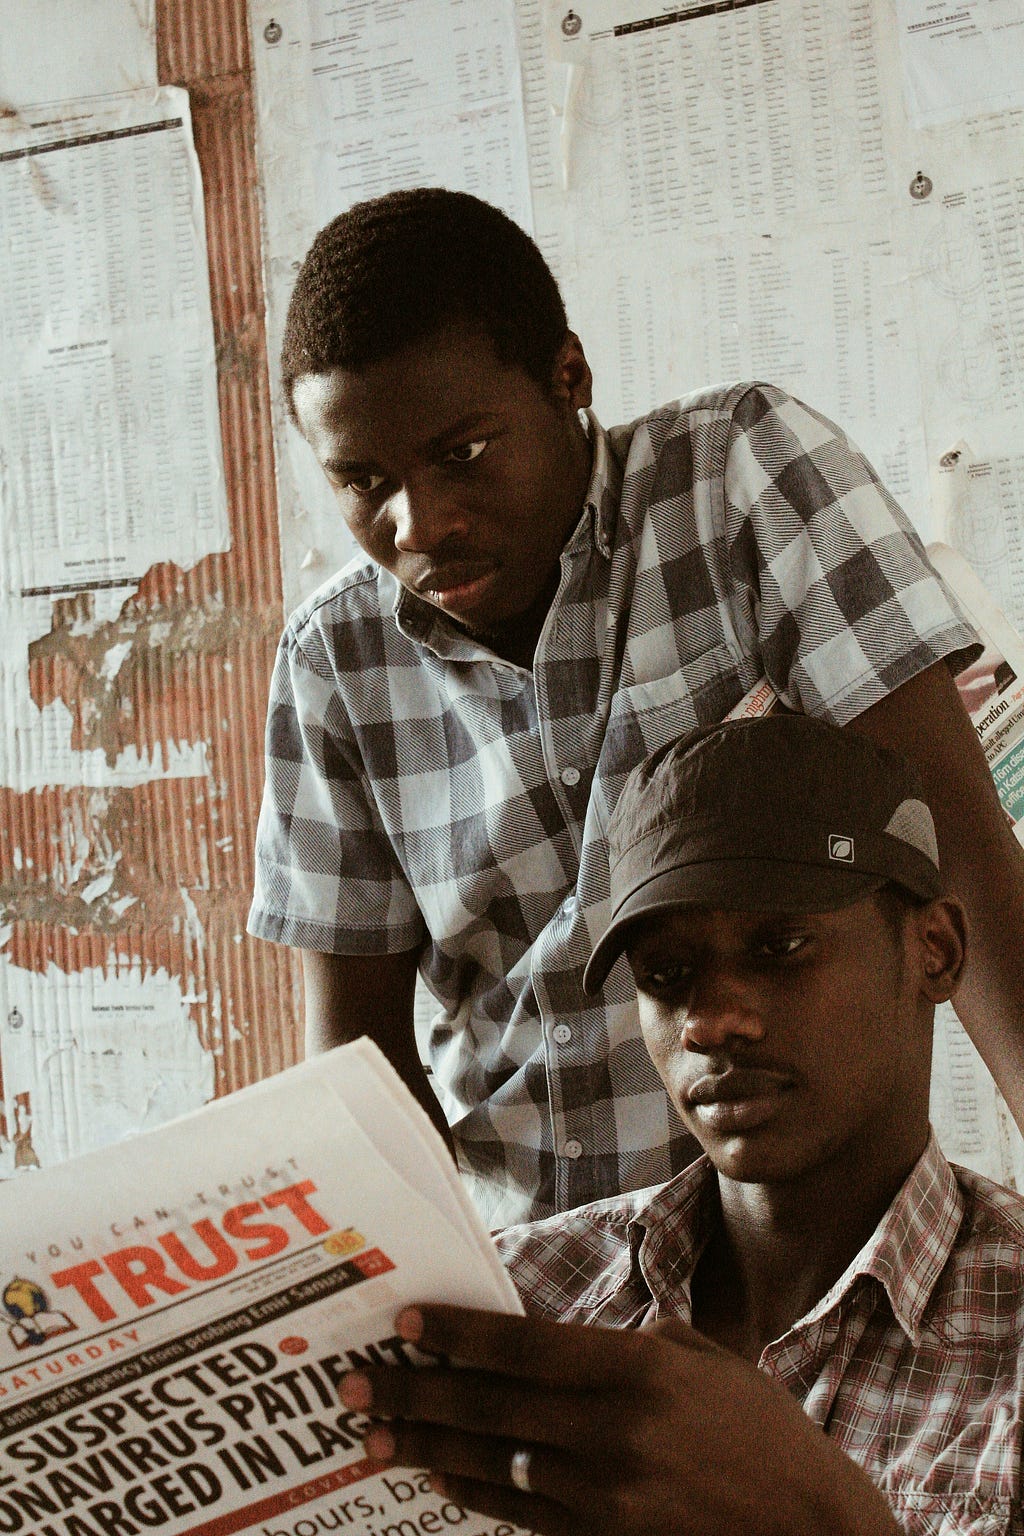 Young Nigerian Boys reading Local Newspapers